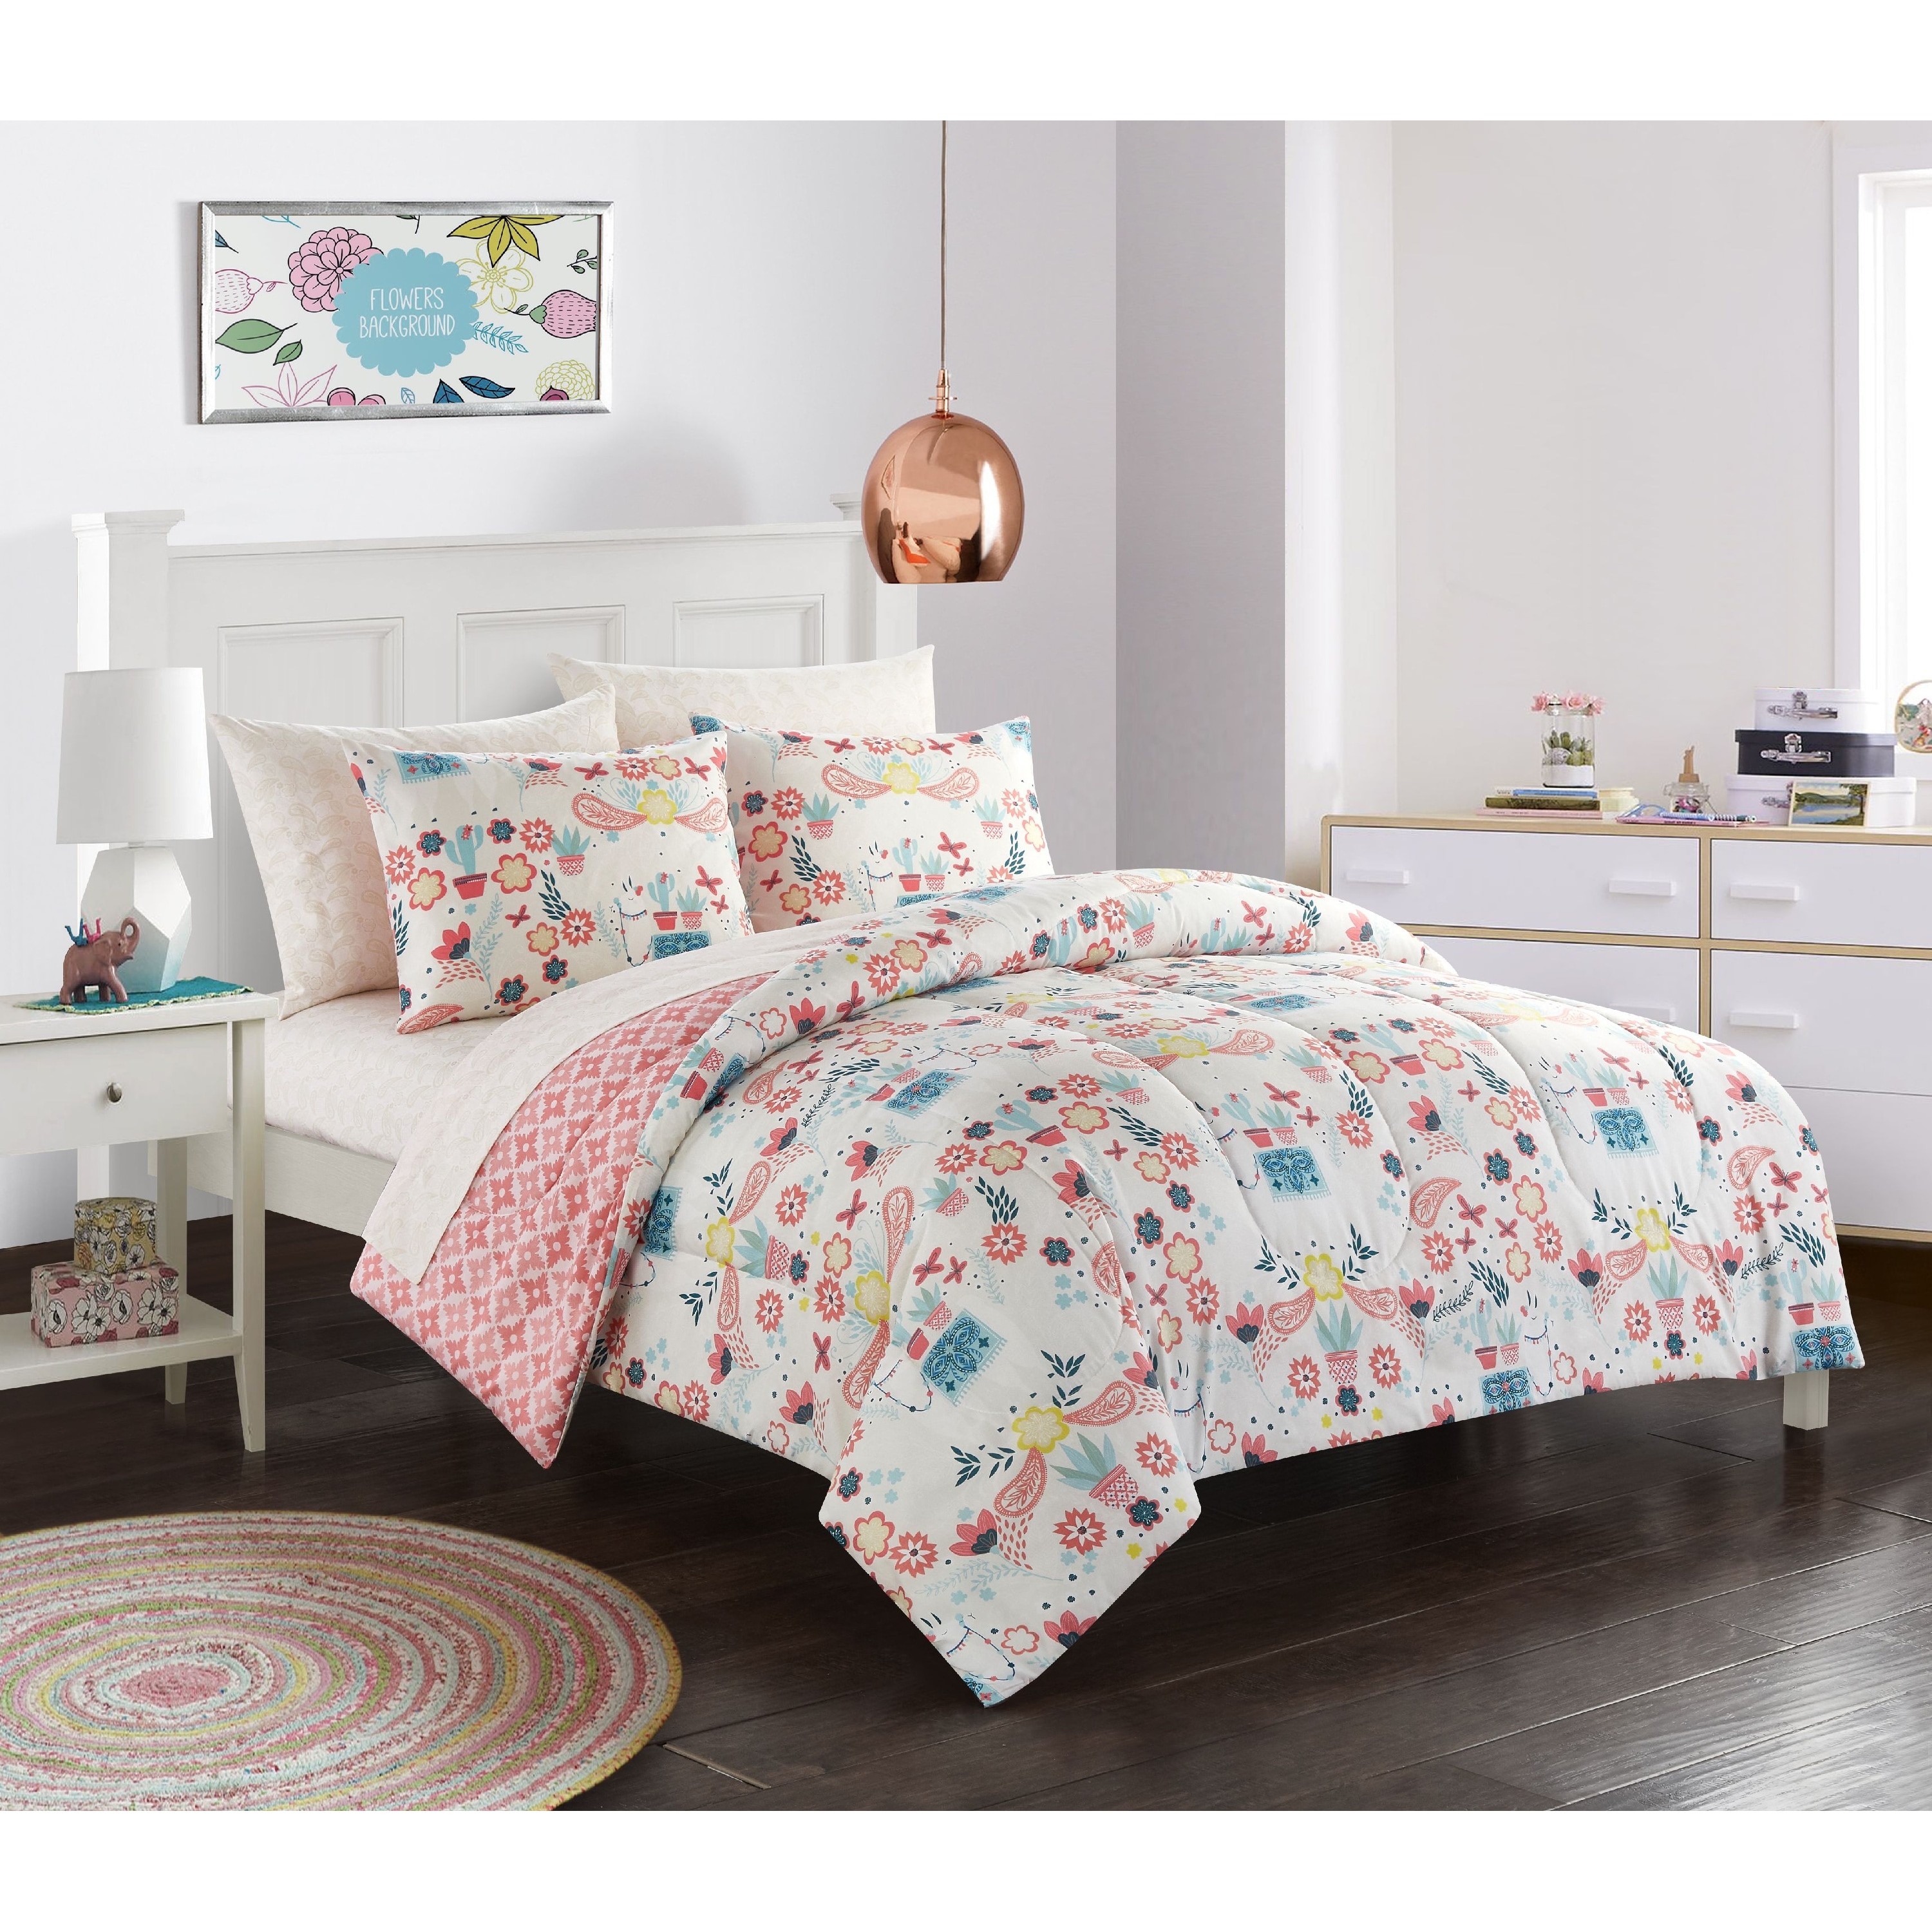 Mainstays Kids Paris Bed in a Bag Bedding w/ Reversible Comforter Twin 